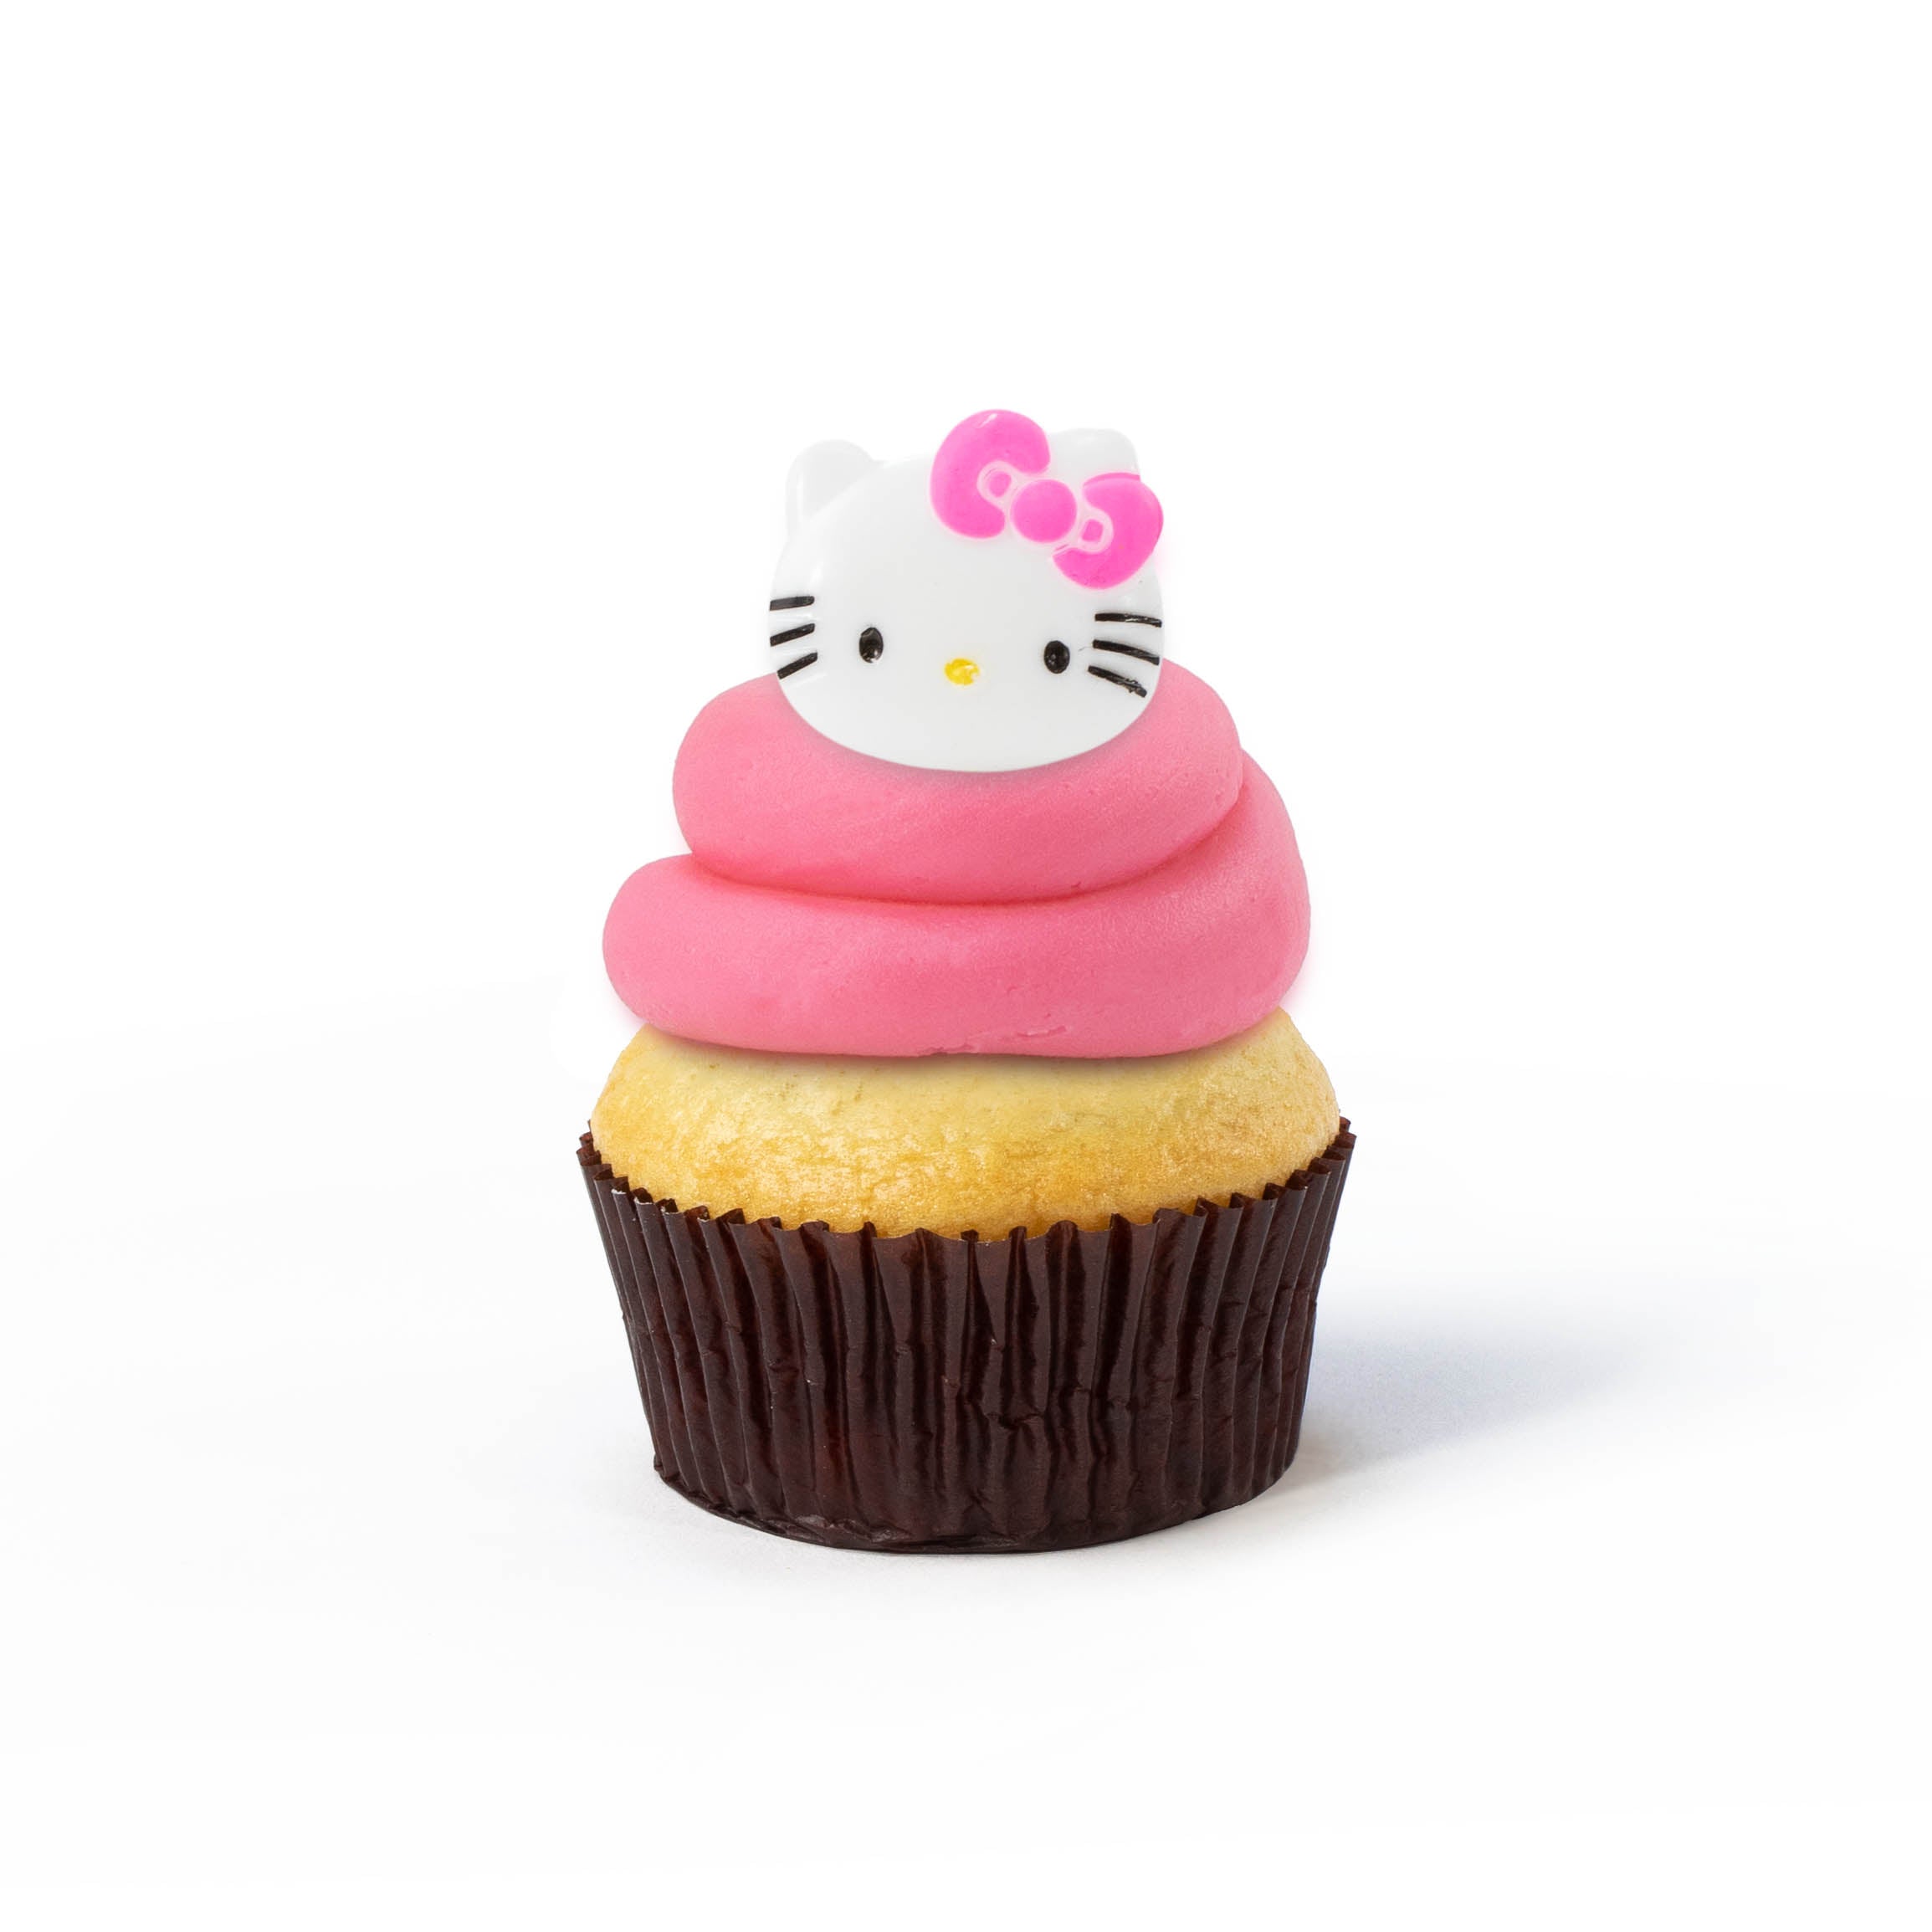 Sugar Rush Cakes - Hello Kitty Cupcakes Topper by One Sweet Cupcake